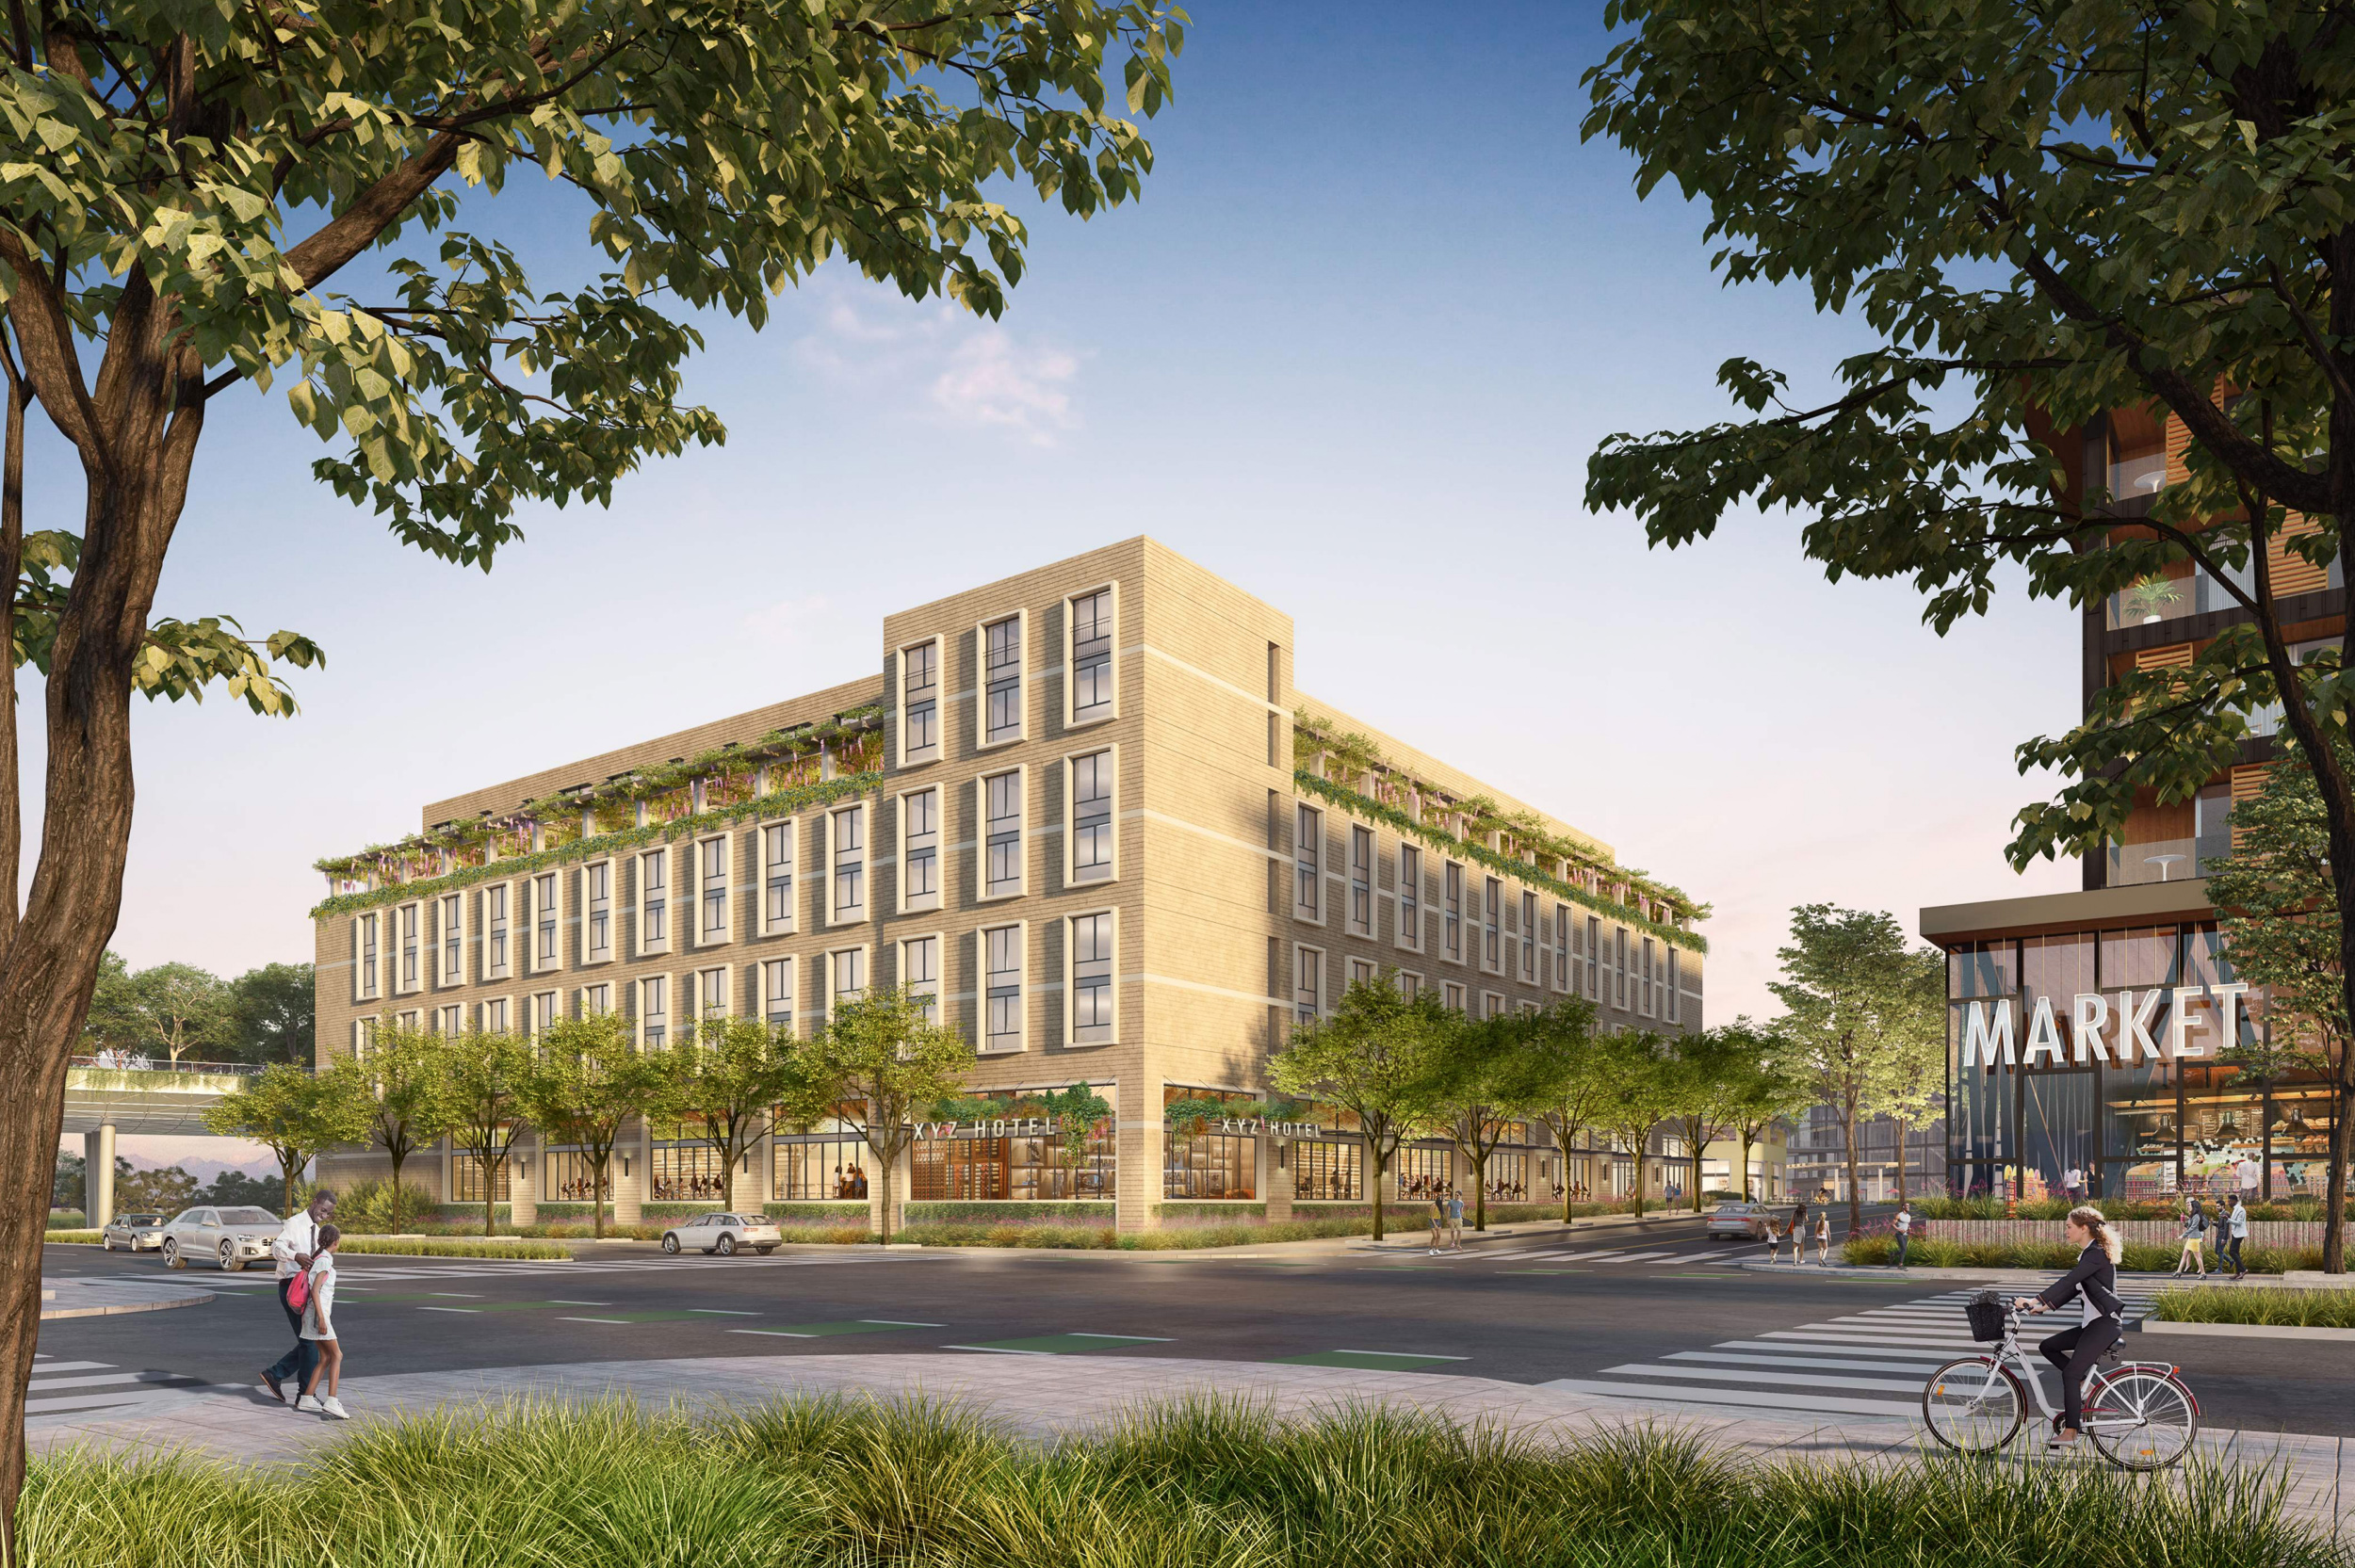 Willow Glen hotel, rendering courtesy Meta and Signature Development Group